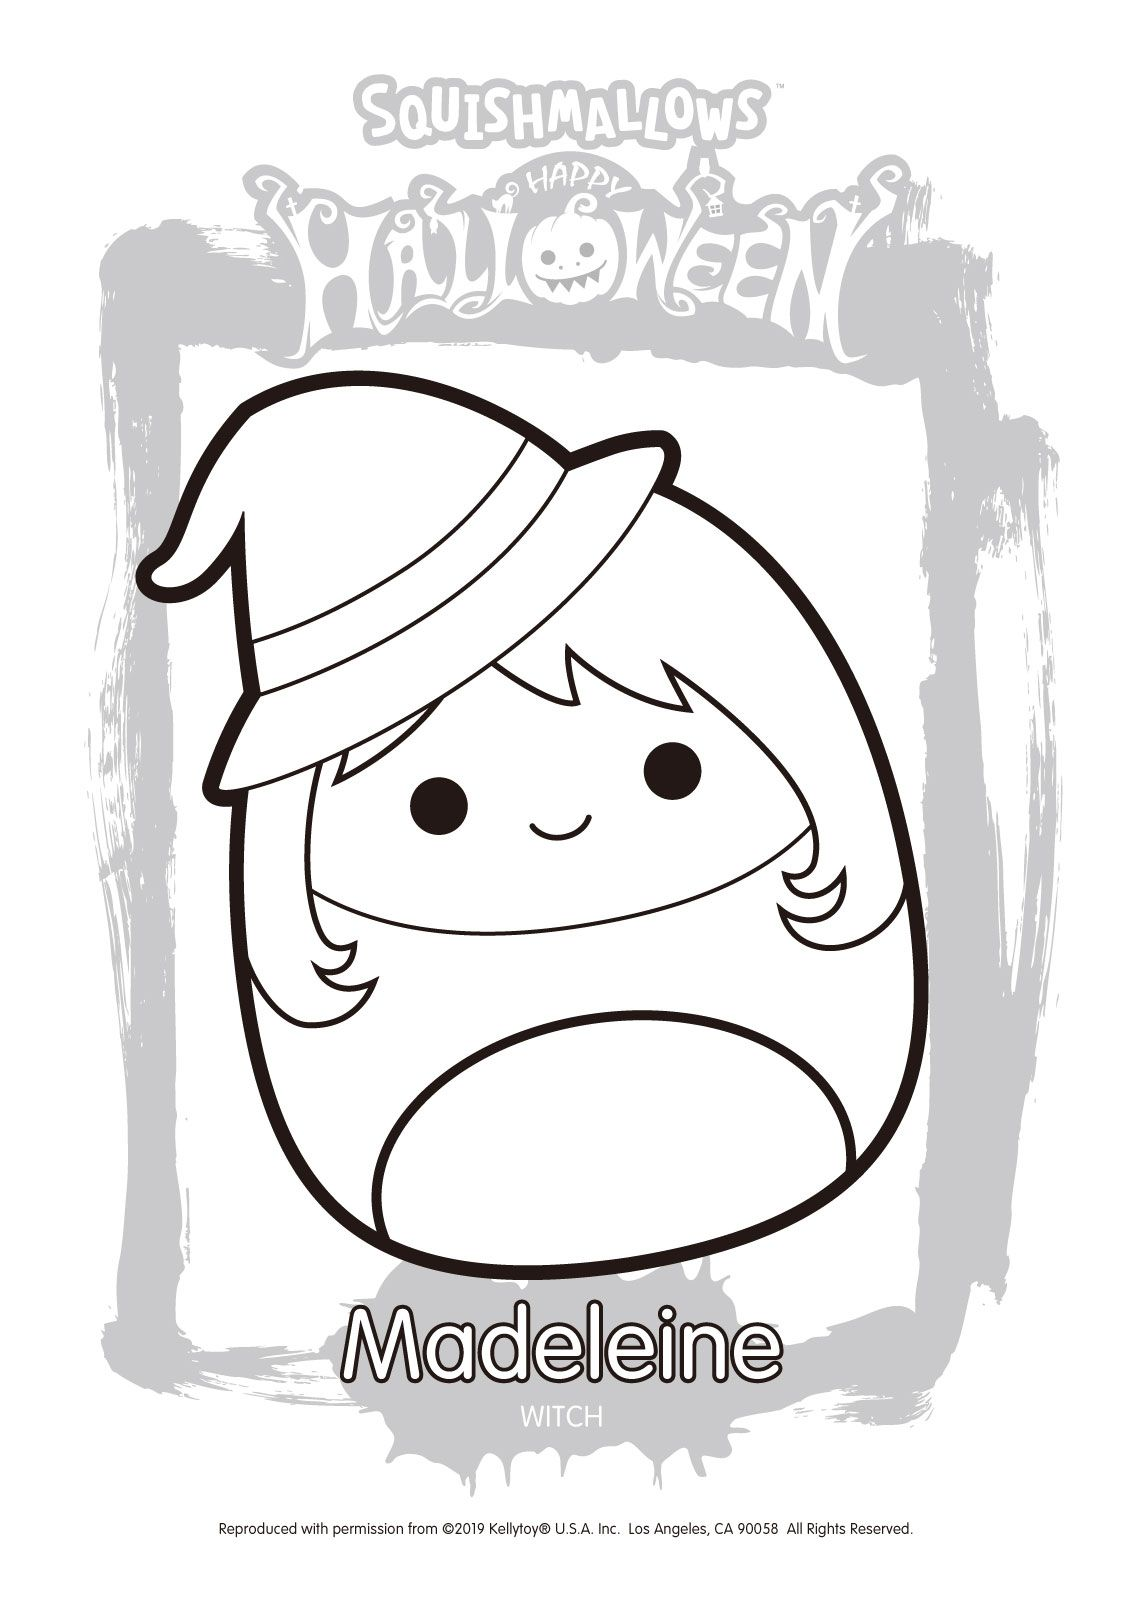 Squishmallows Madeleine Coloring Pages